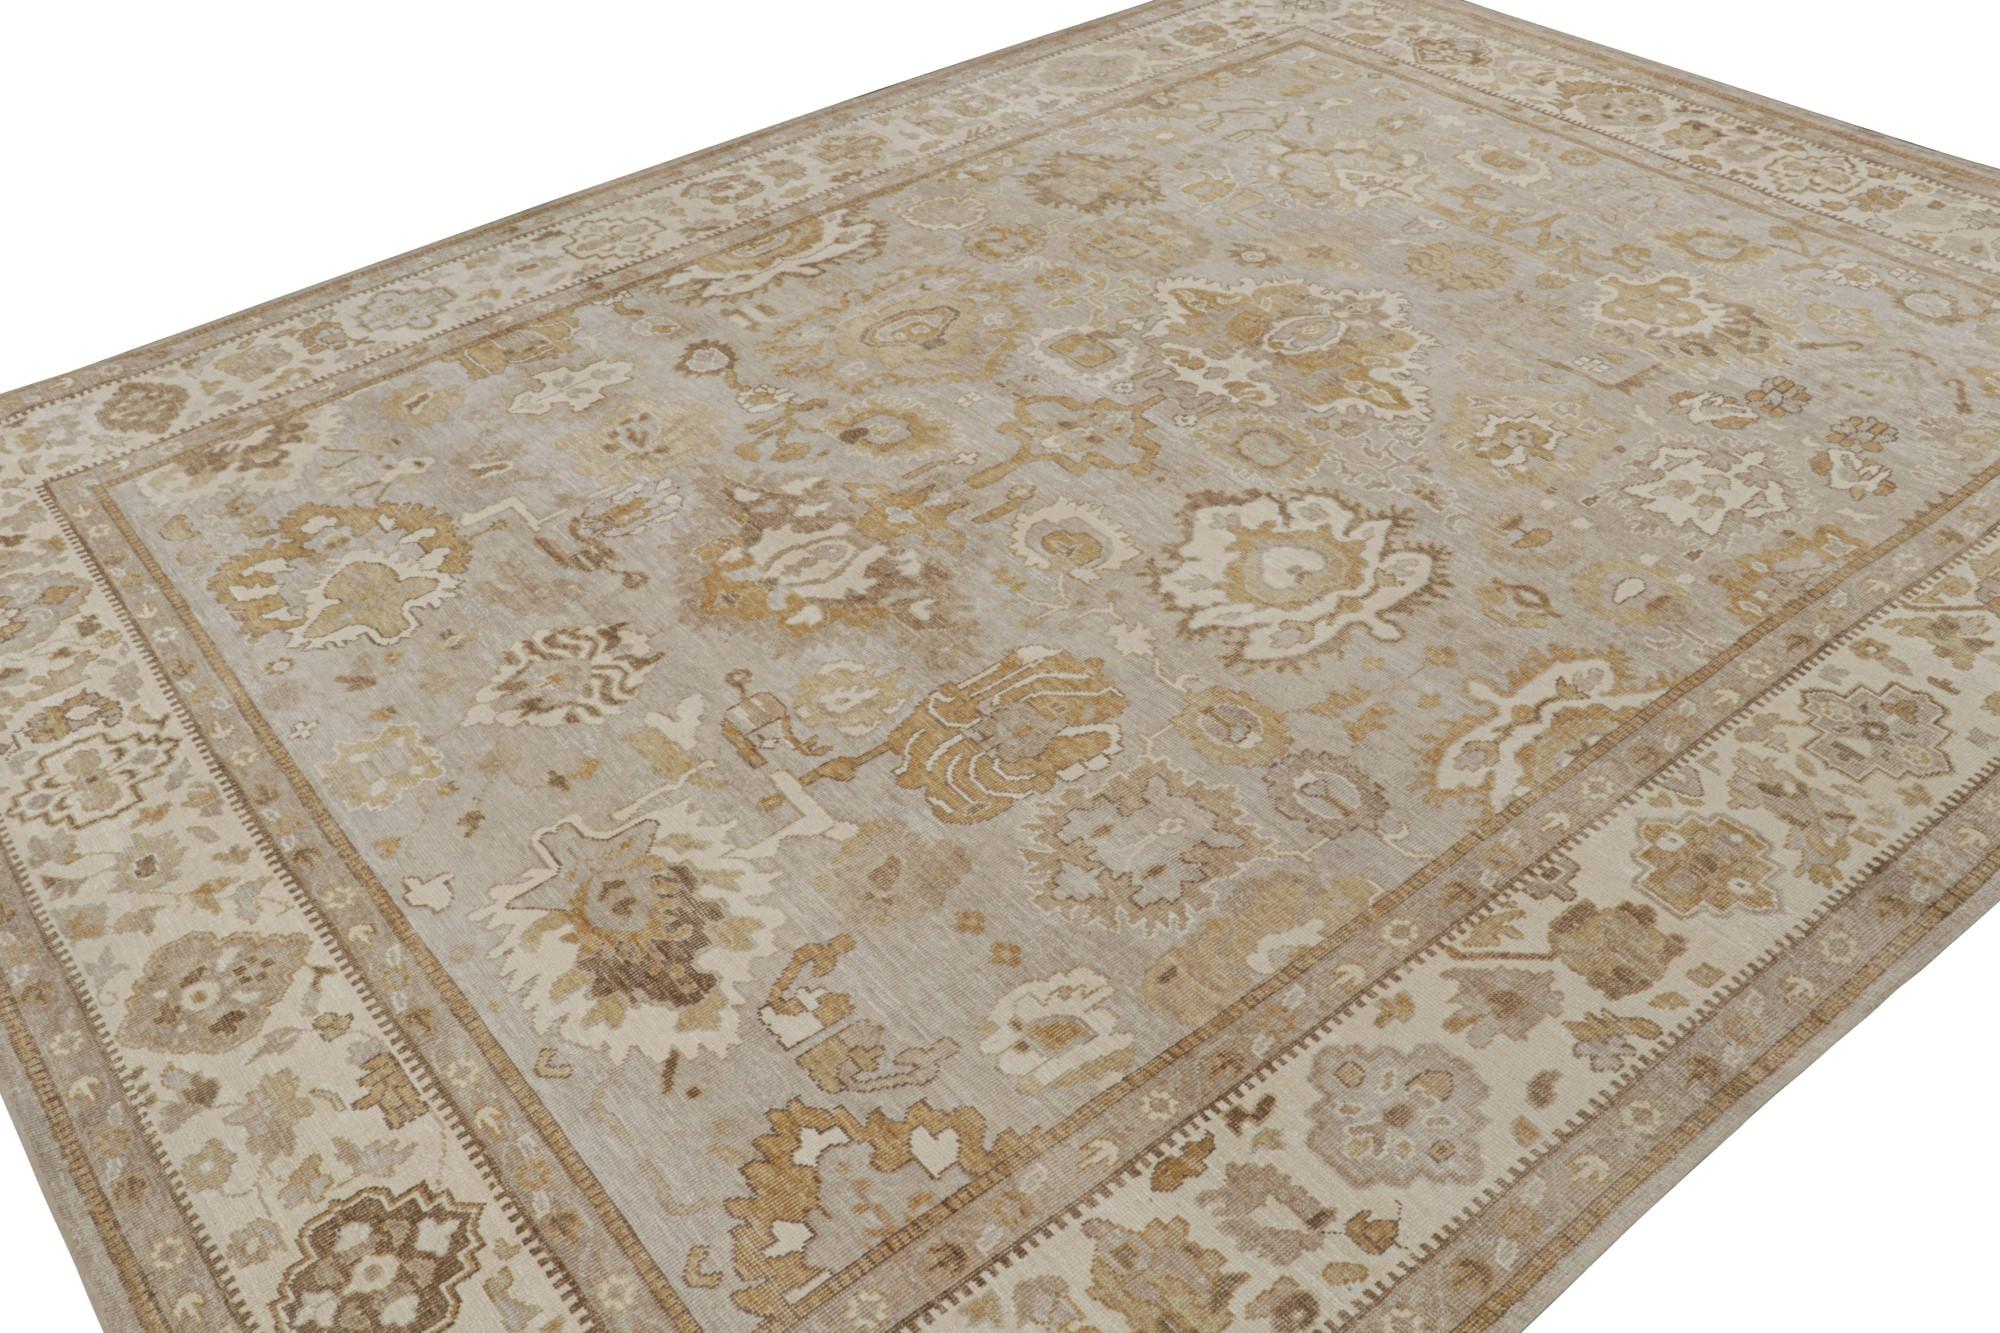 This 12x15 rug from the Modern Classics Collection by Rug & Kilim is from a new line inspired by antique Oushak rugs. Hand-knotted in wool & sari silk, its design enjoys beige-brown & gold floral patterns.  

On the Design: 

The rug is made with a